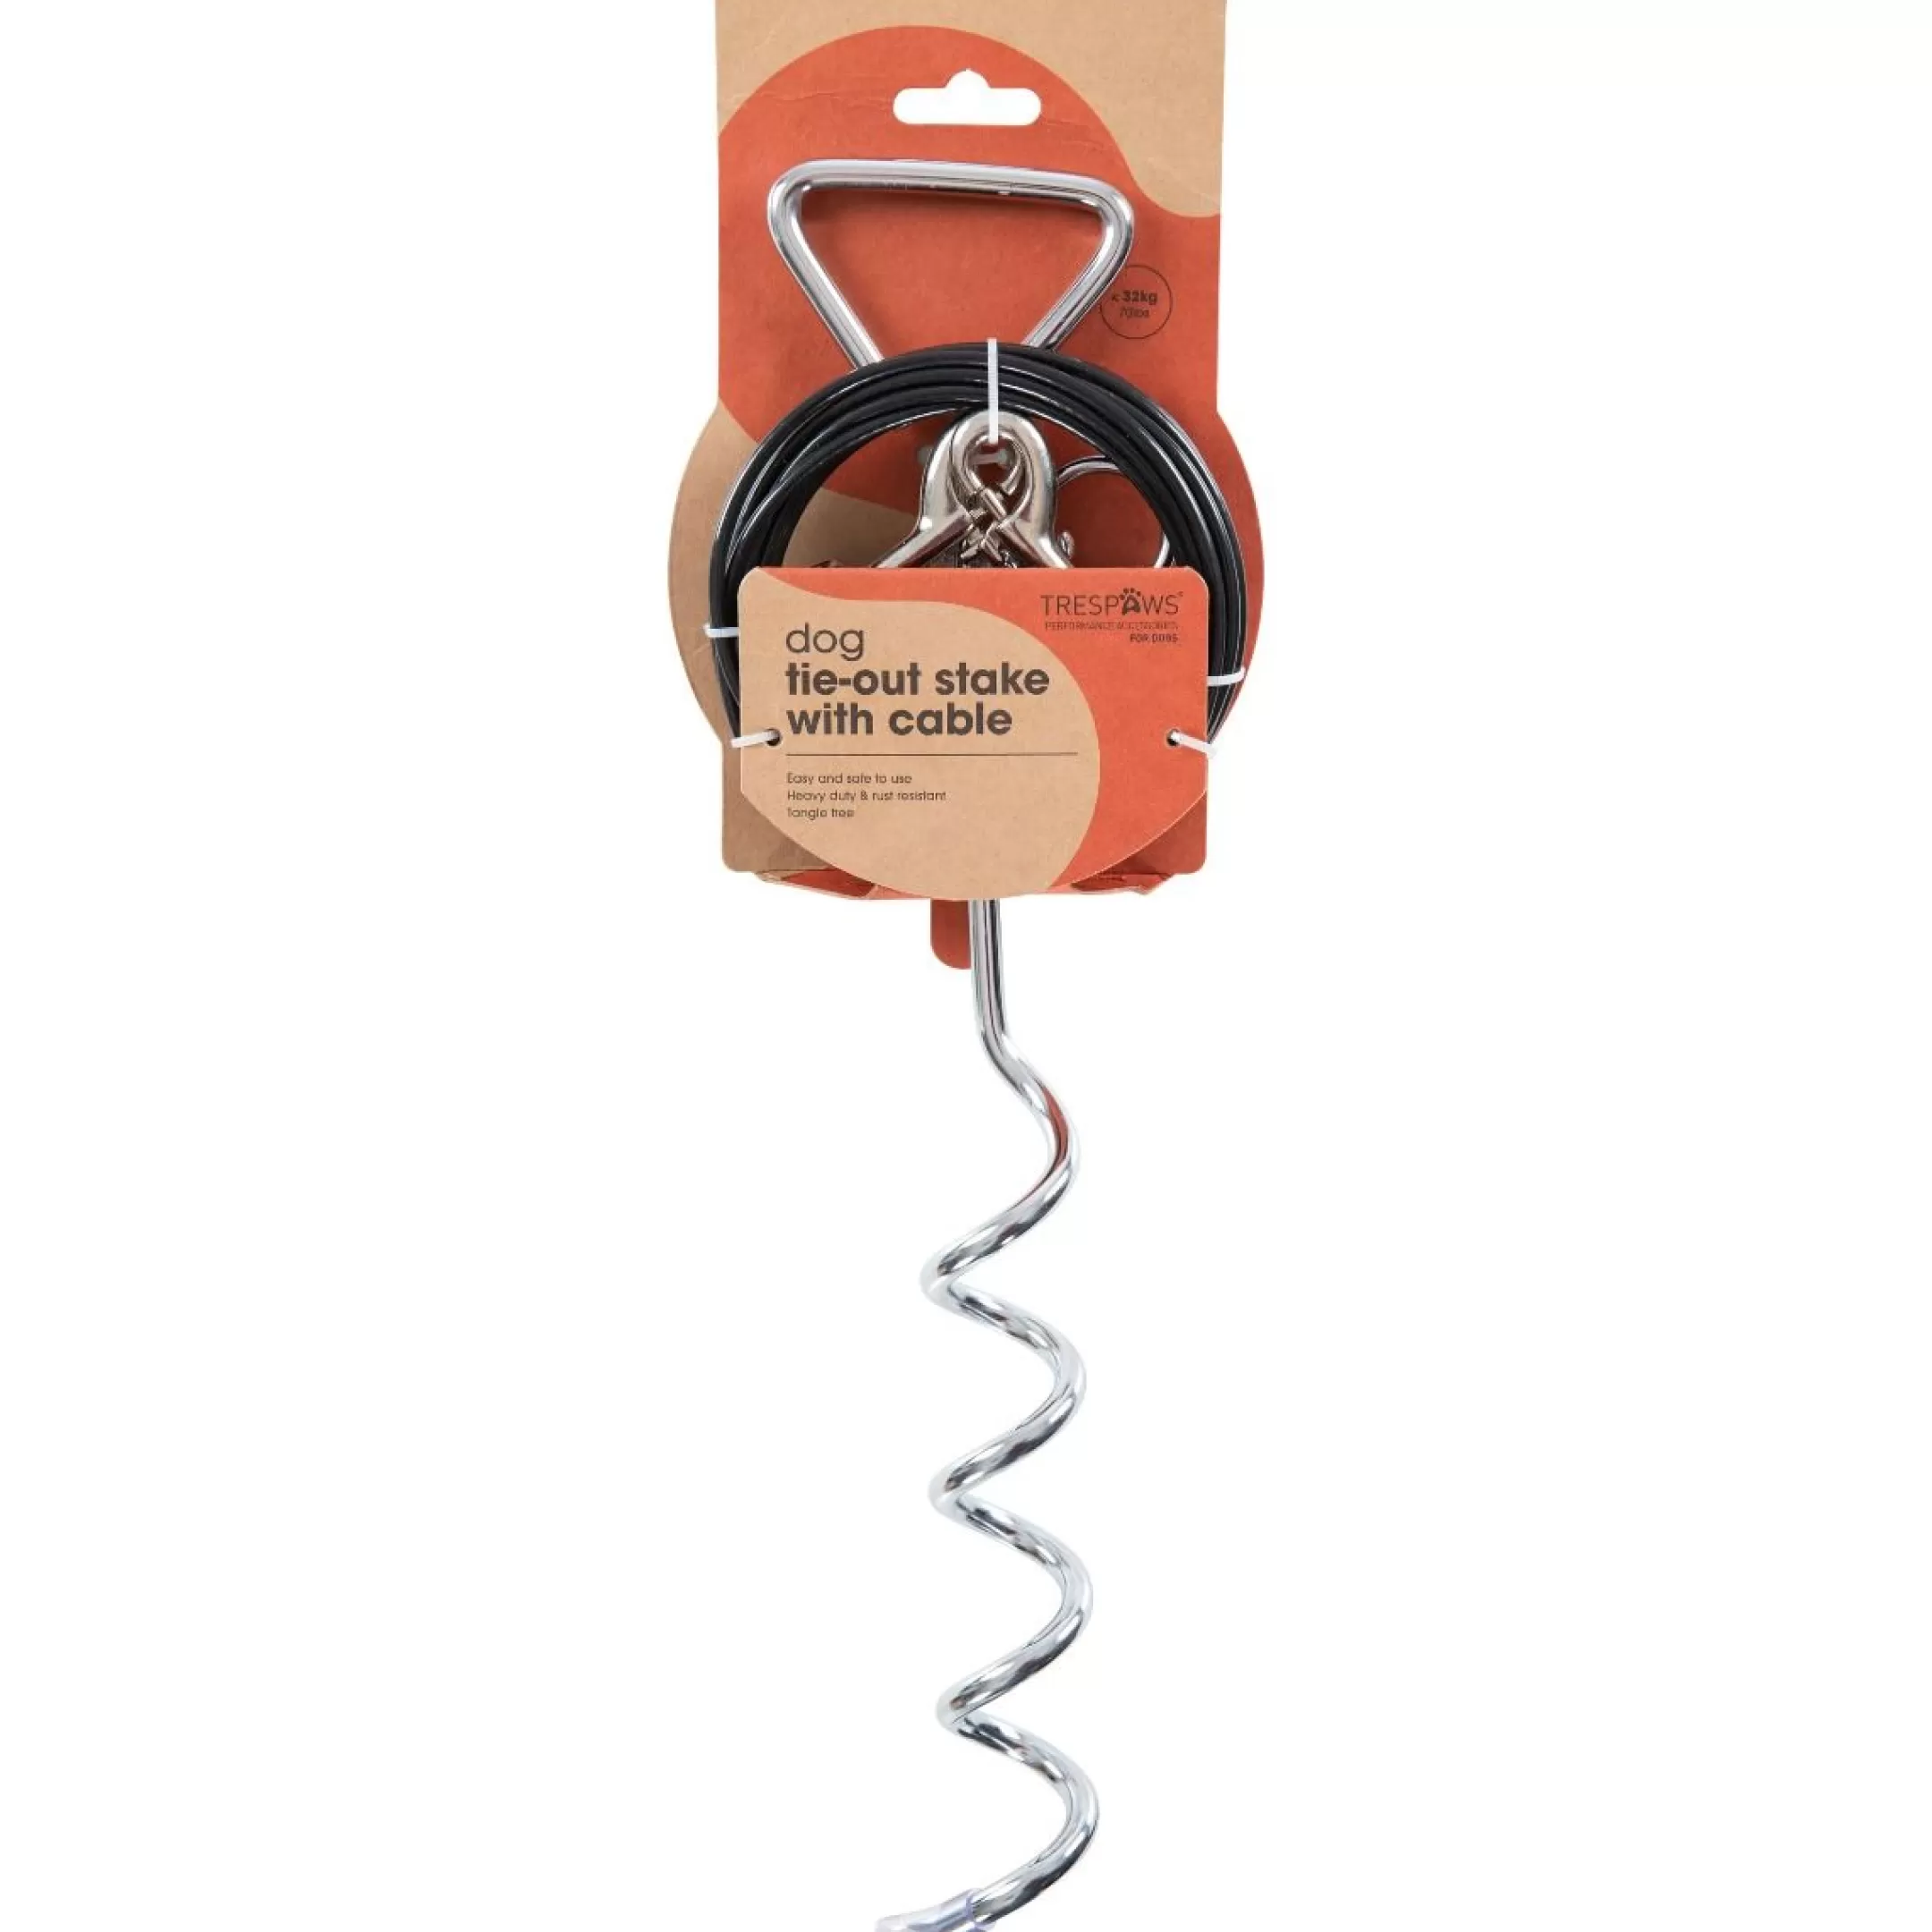 Trespaws Dog Tie Out Stake with Cable Tether | Trespass Store